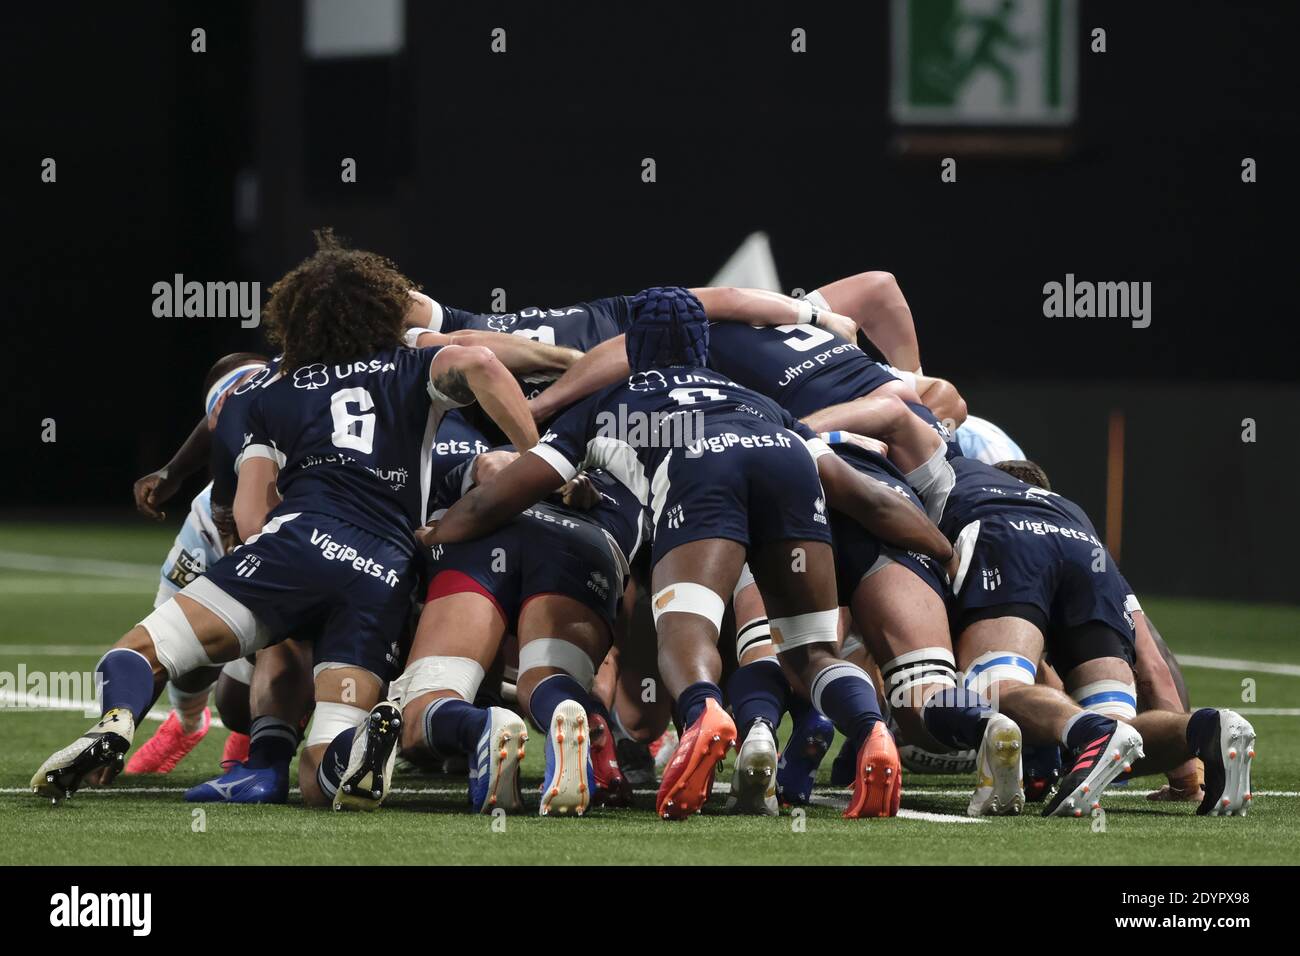 Nanterre, Hauts de Seine, France. 27th Dec, 2020. the Agen scrum pack pushes during the French Top 14 rugby championship between Racing 92 and Agen at the U Arena stadium in Nanterre - France.Racing 92 Won 45-10. Credit: Pierre Stevenin/ZUMA Wire/Alamy Live News Stock Photo